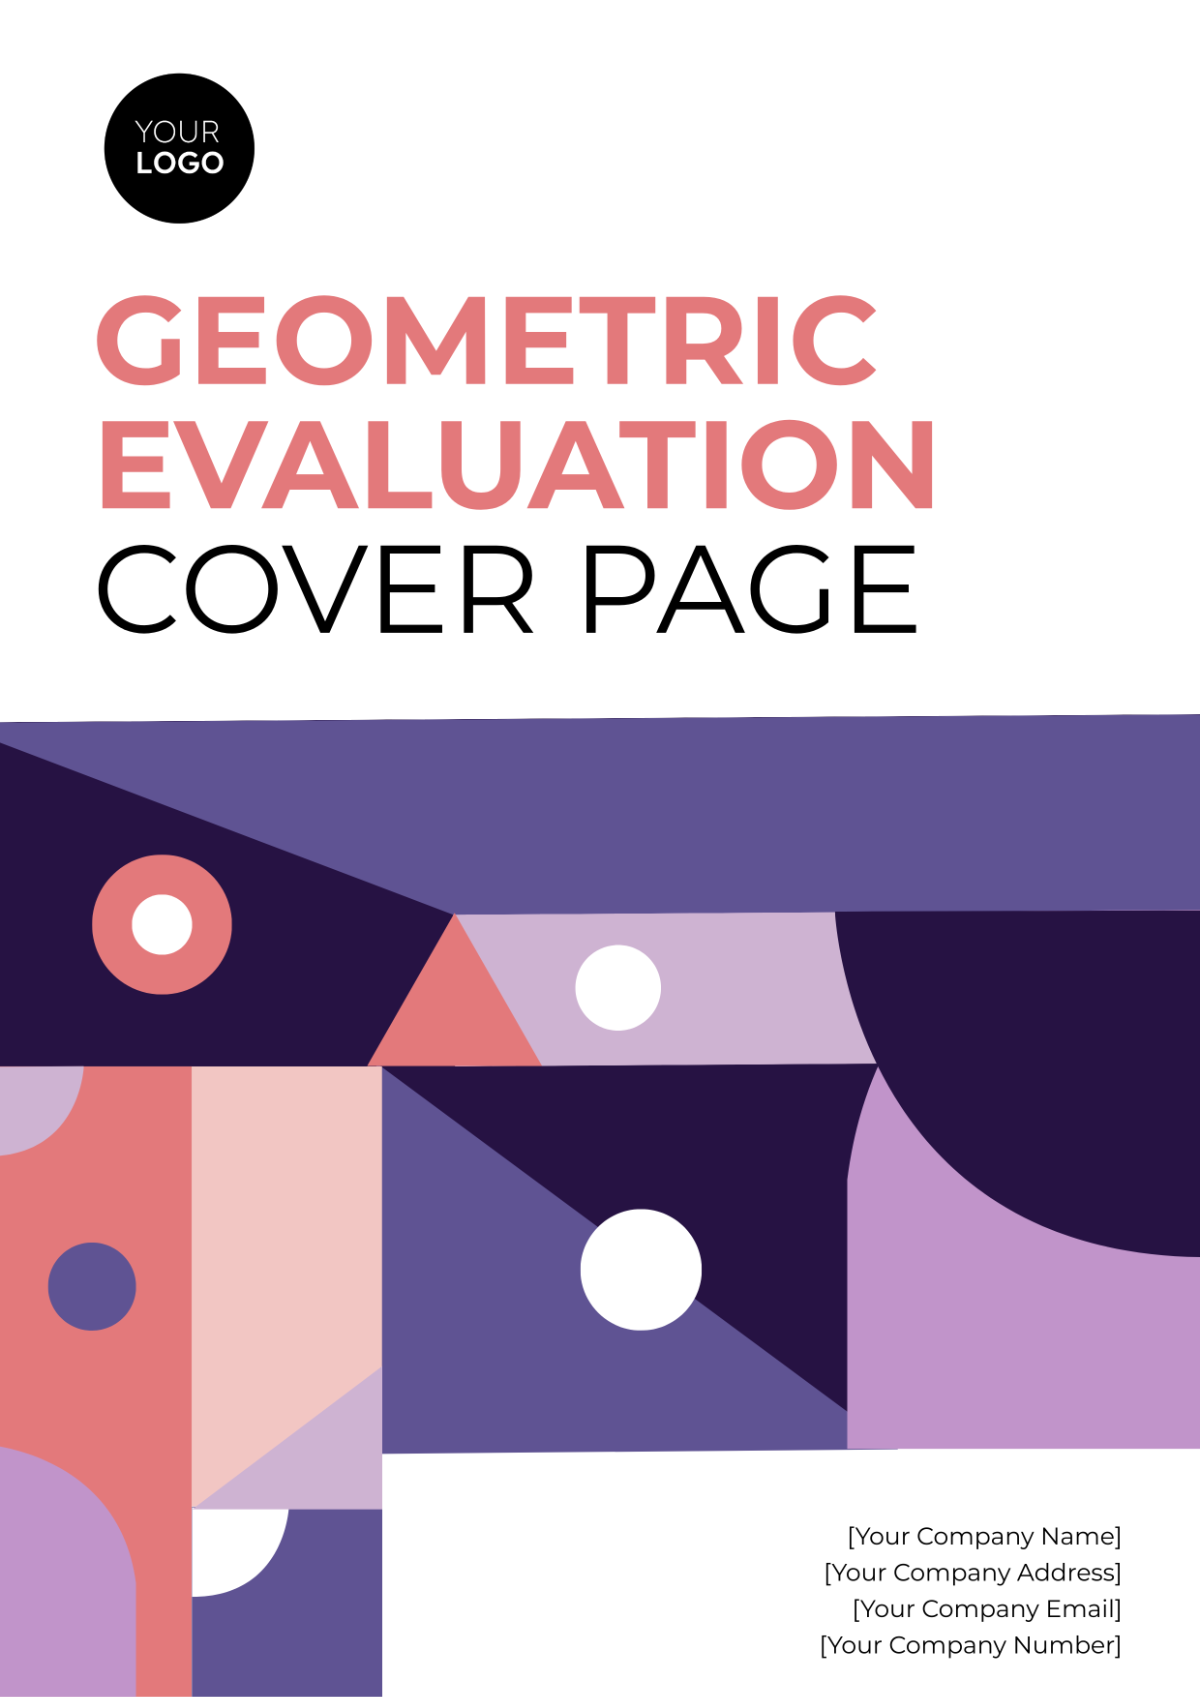 Geometric Evaluation Cover Page